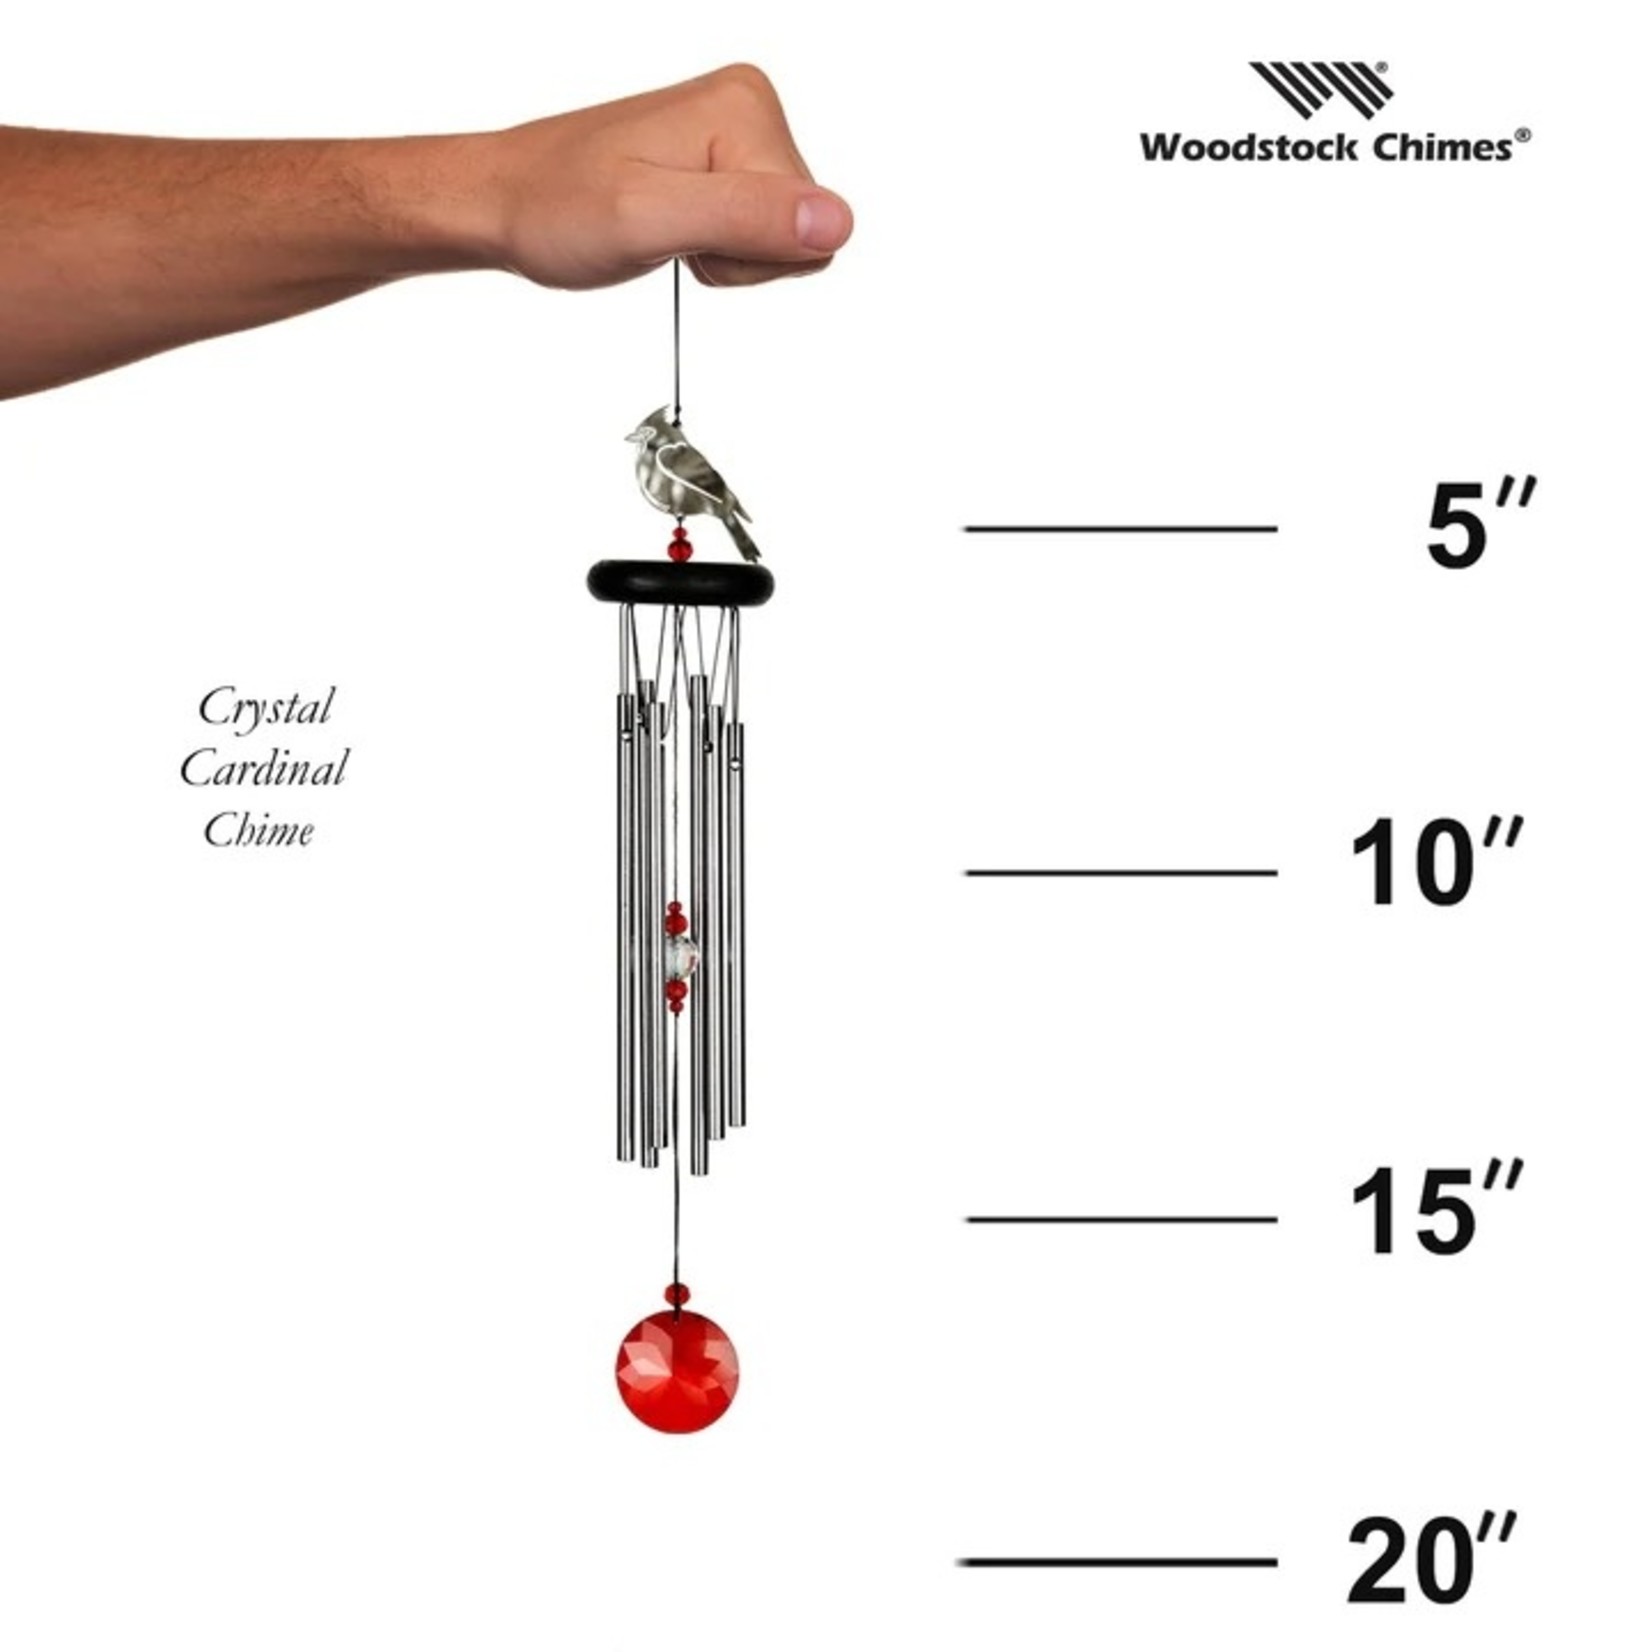 Woodstock Chimes Crystal Cardinal Chime